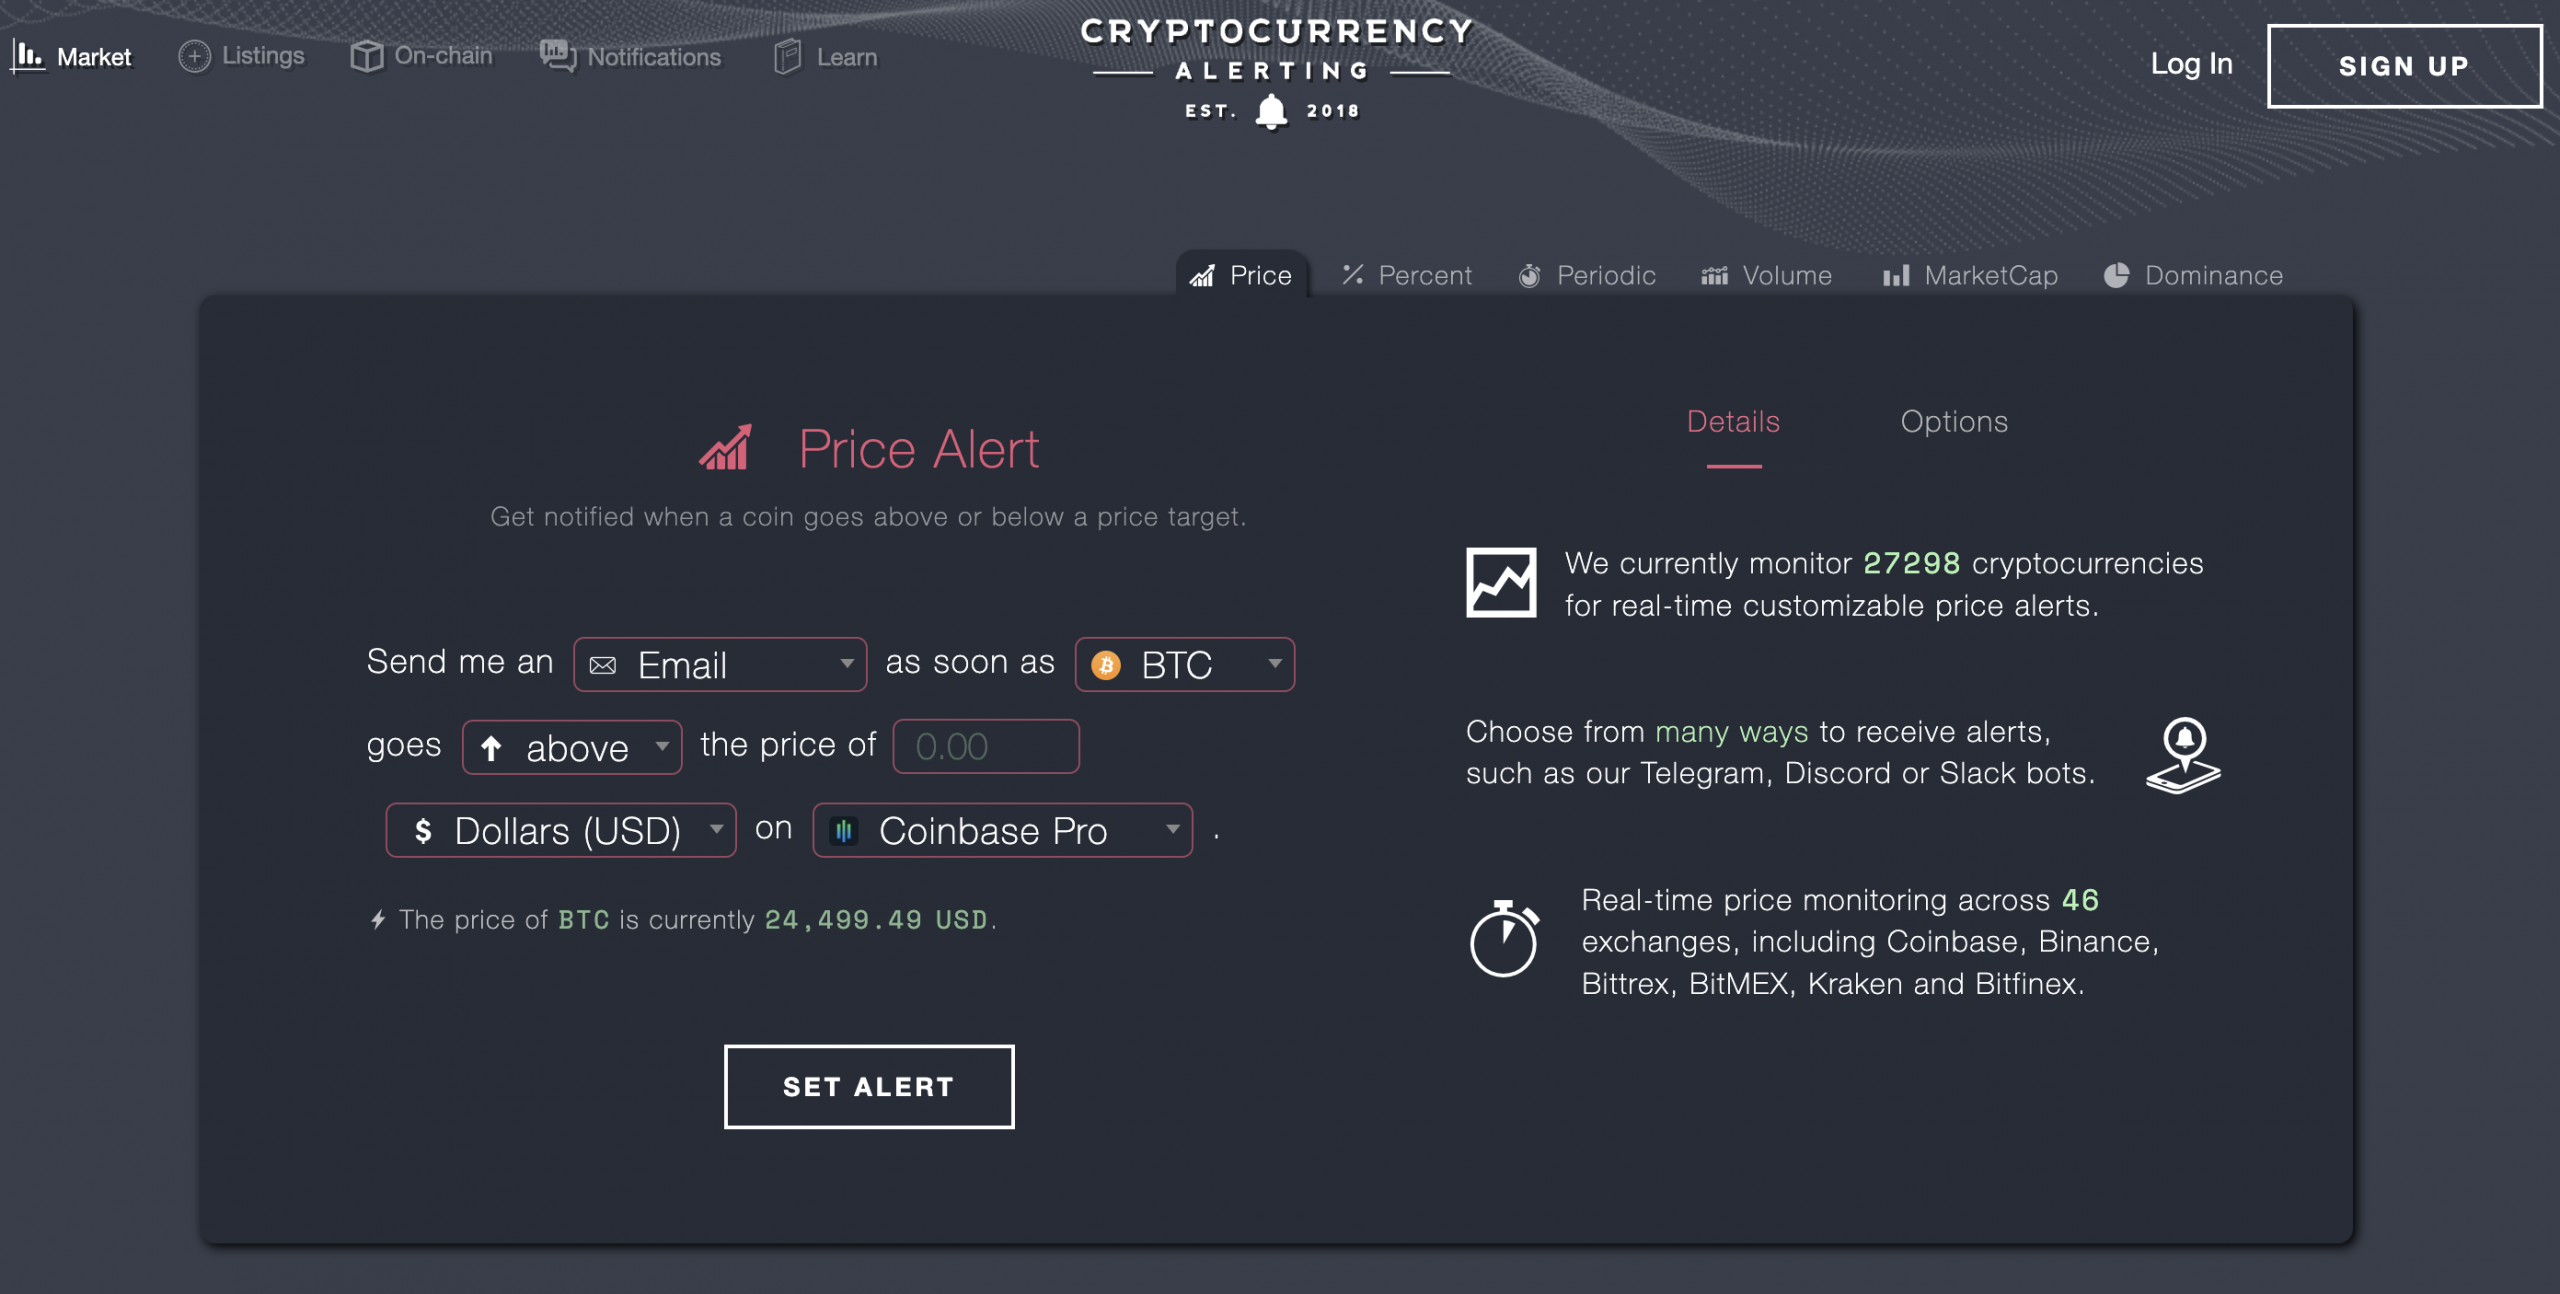 Cryptocurrency Alerting